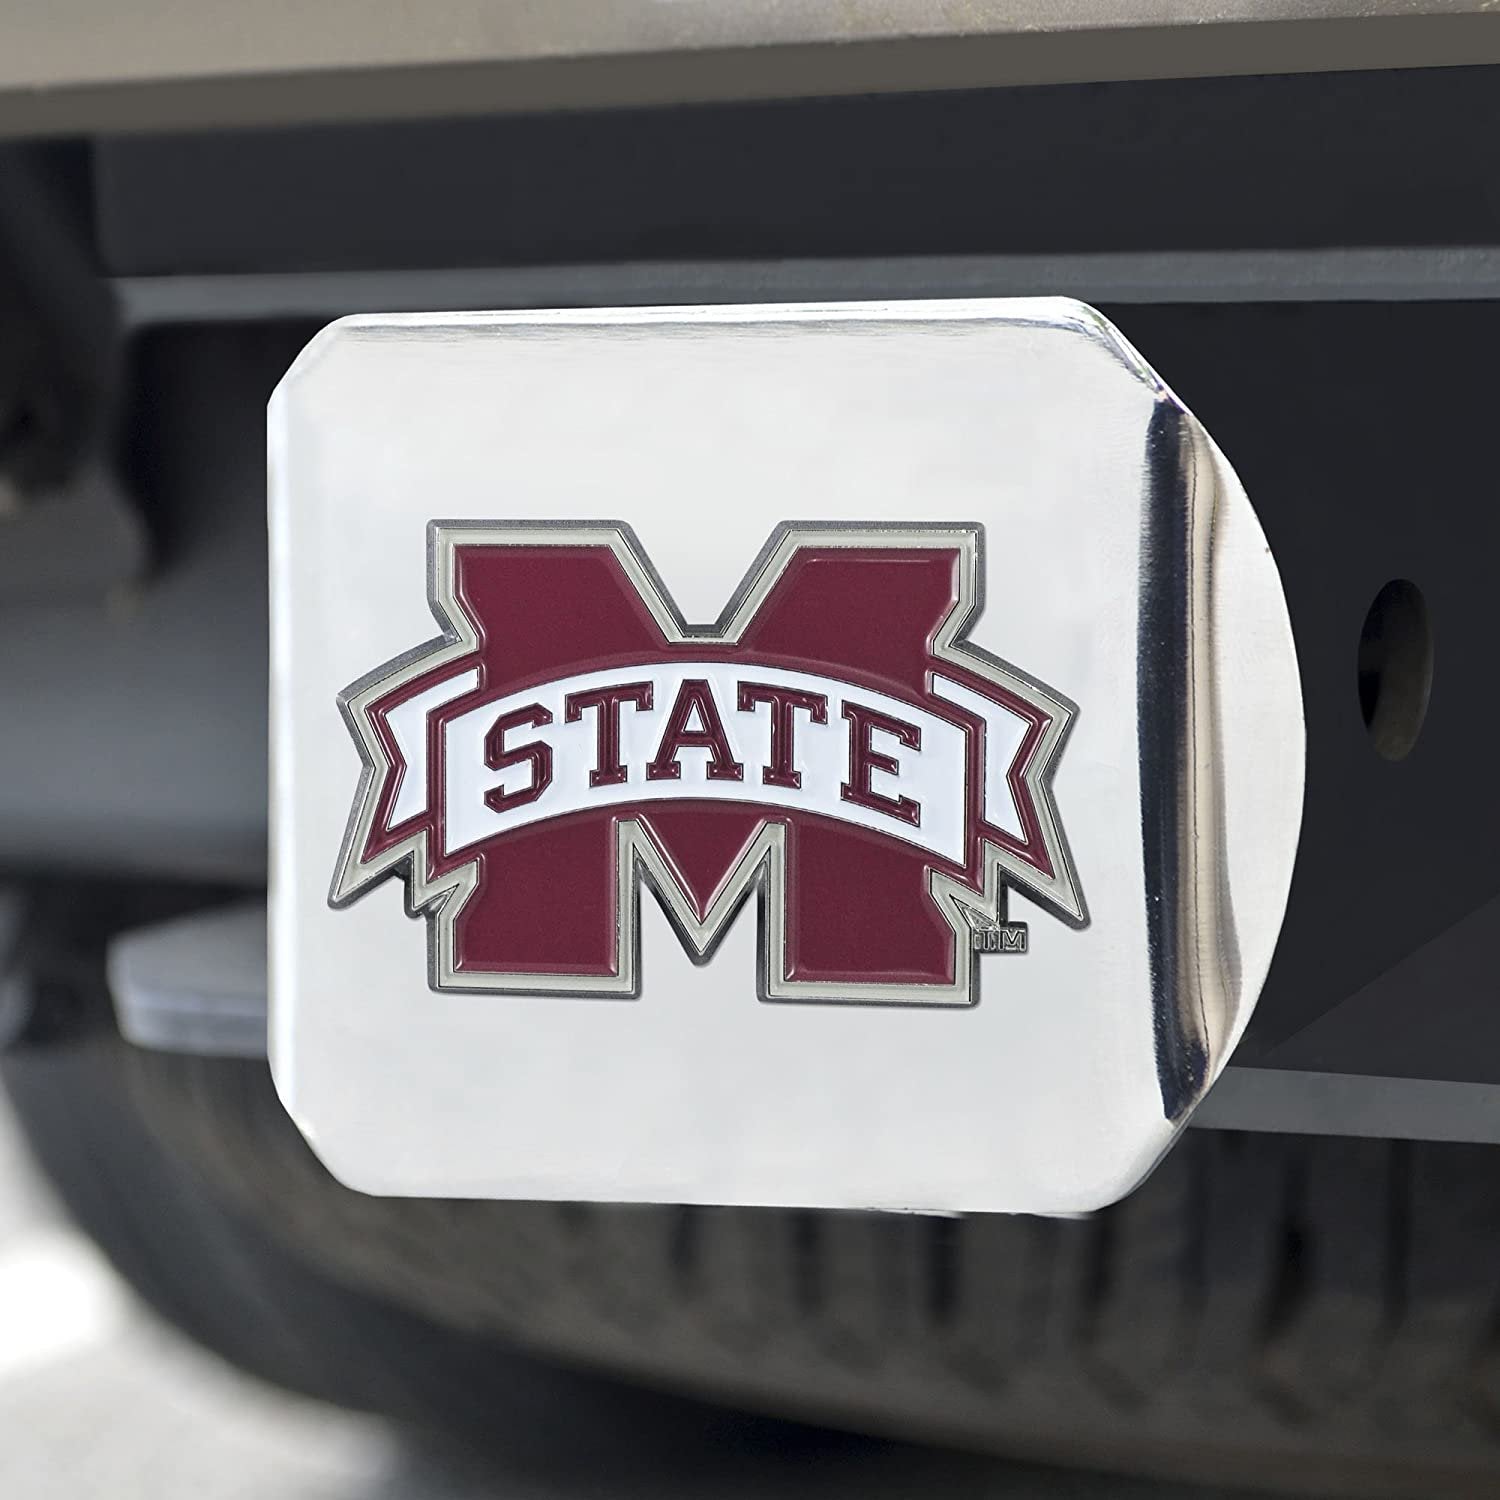 Mississippi State Bulldogs Hitch Cover Solid Metal with Raised Color Metal Emblem 2" Square Type III University